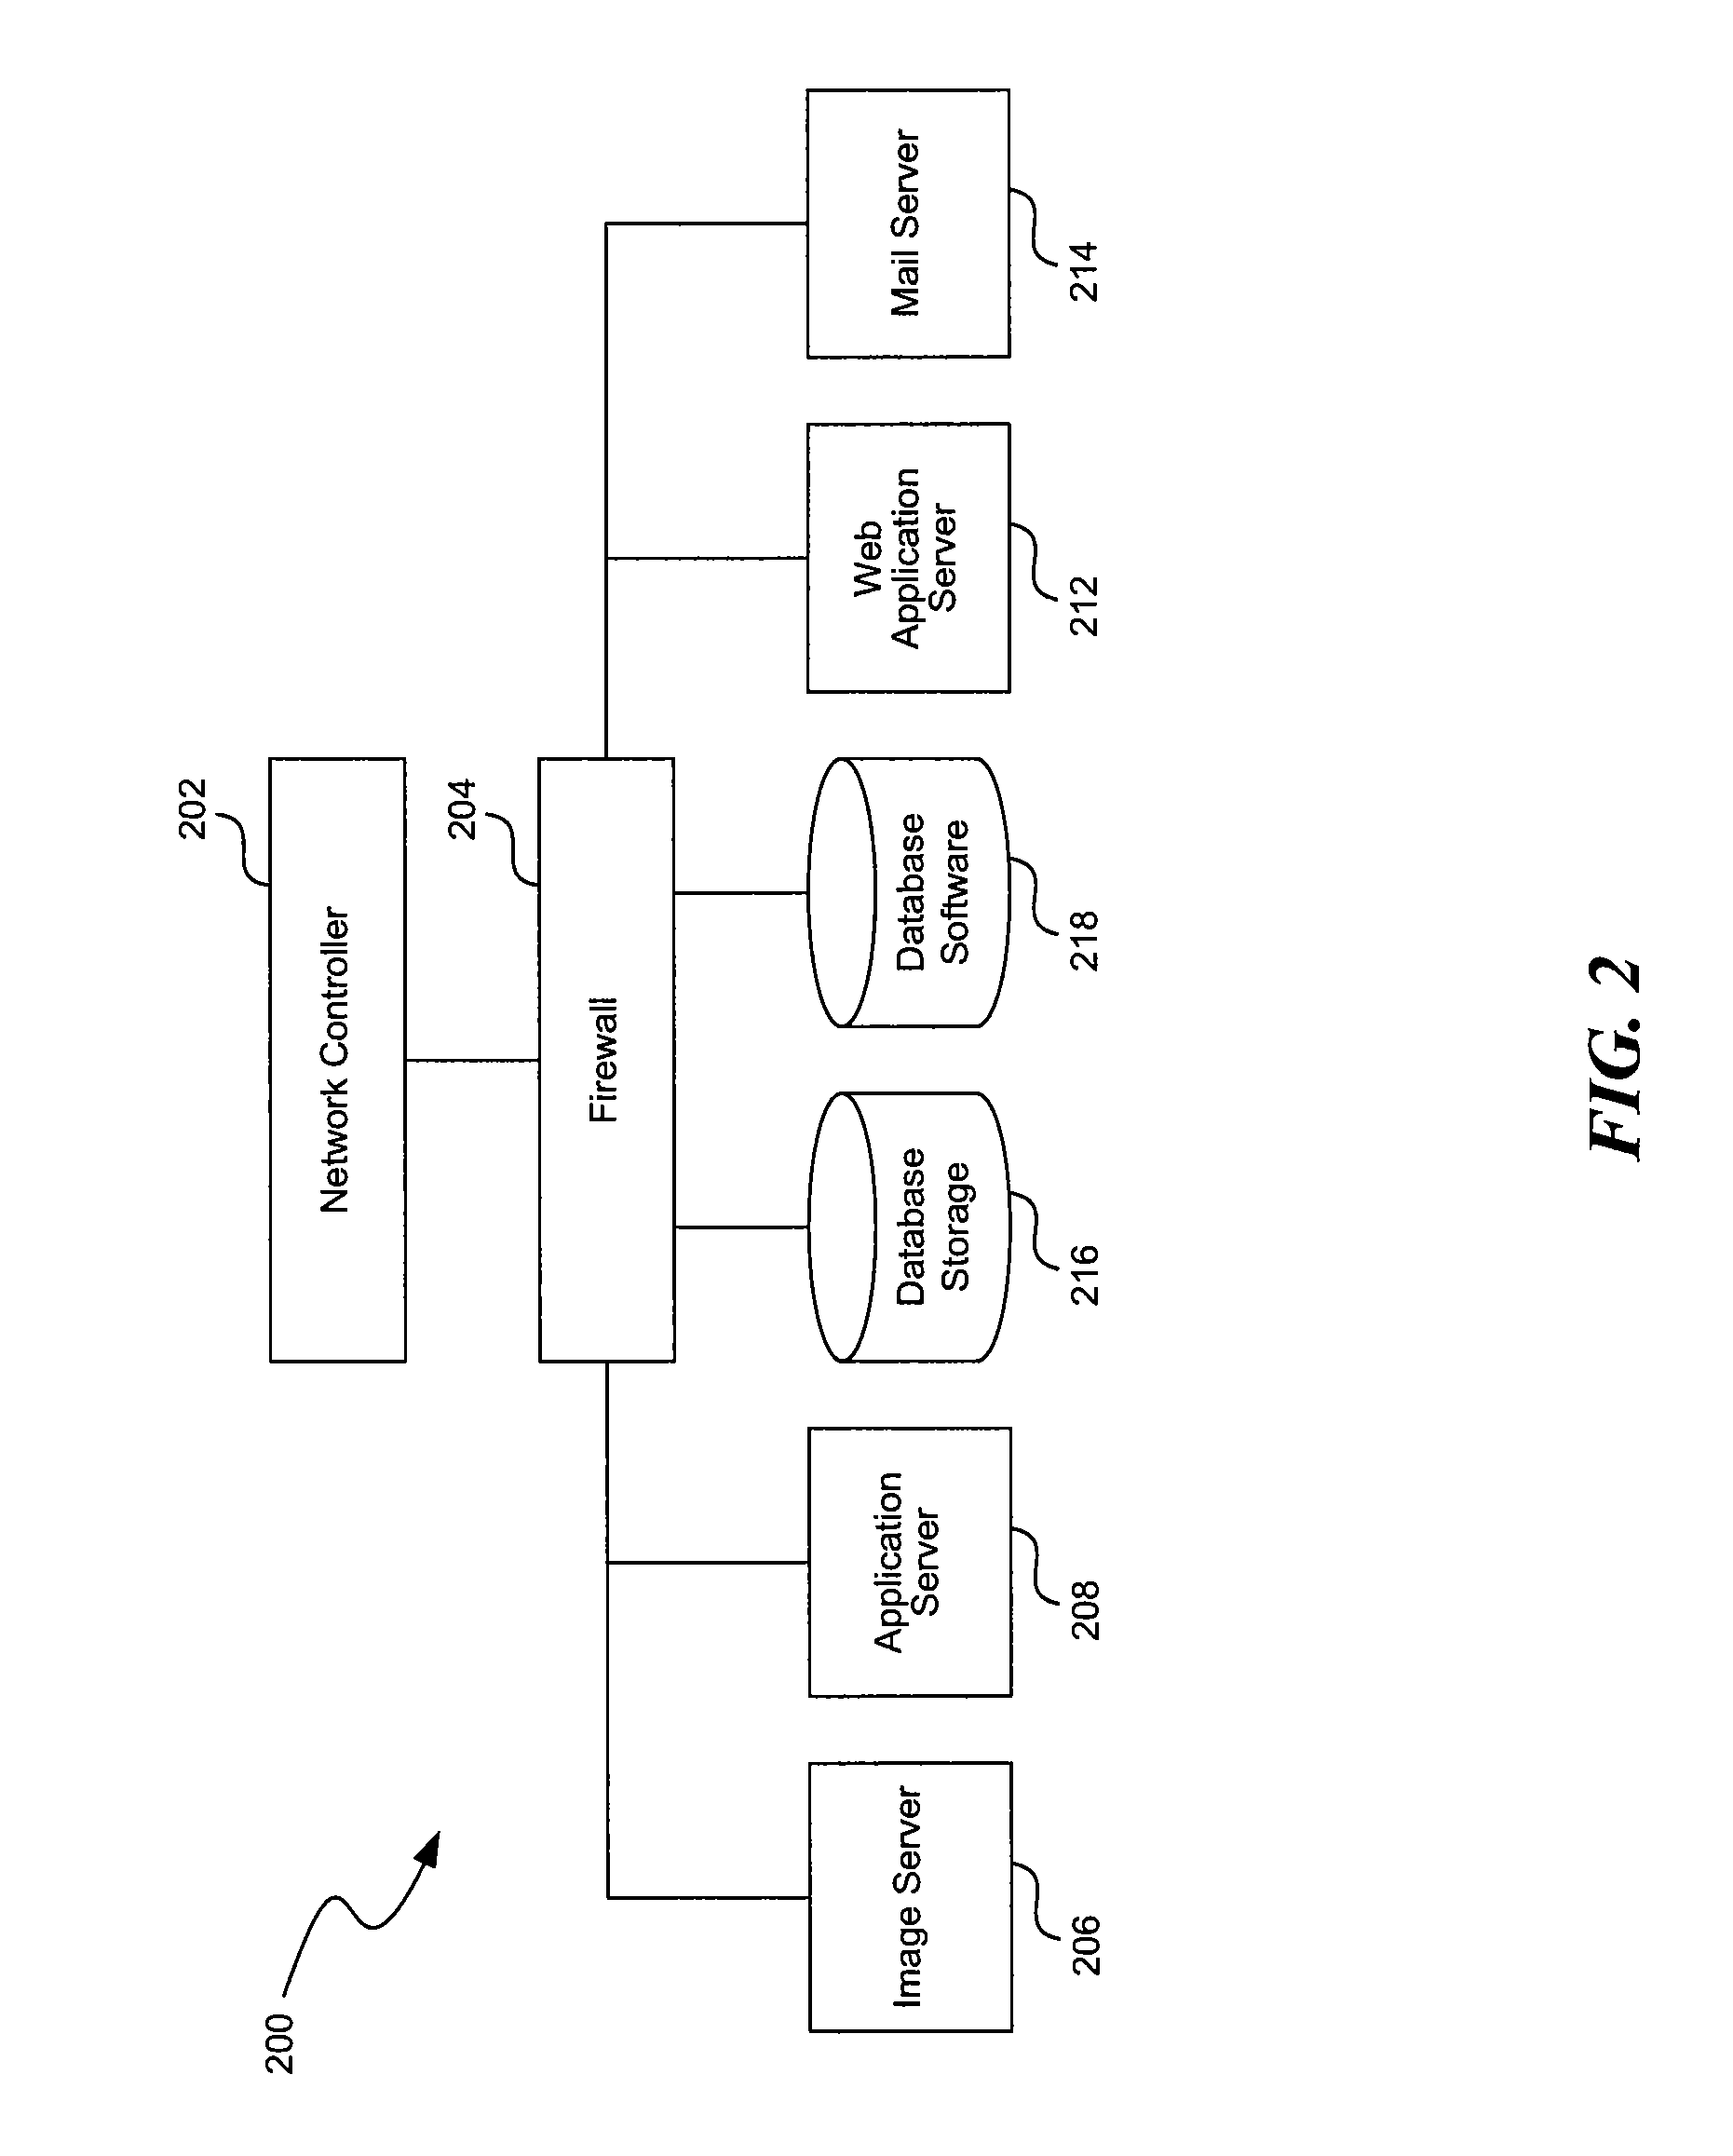 System and method of a knowledge management and networking environment